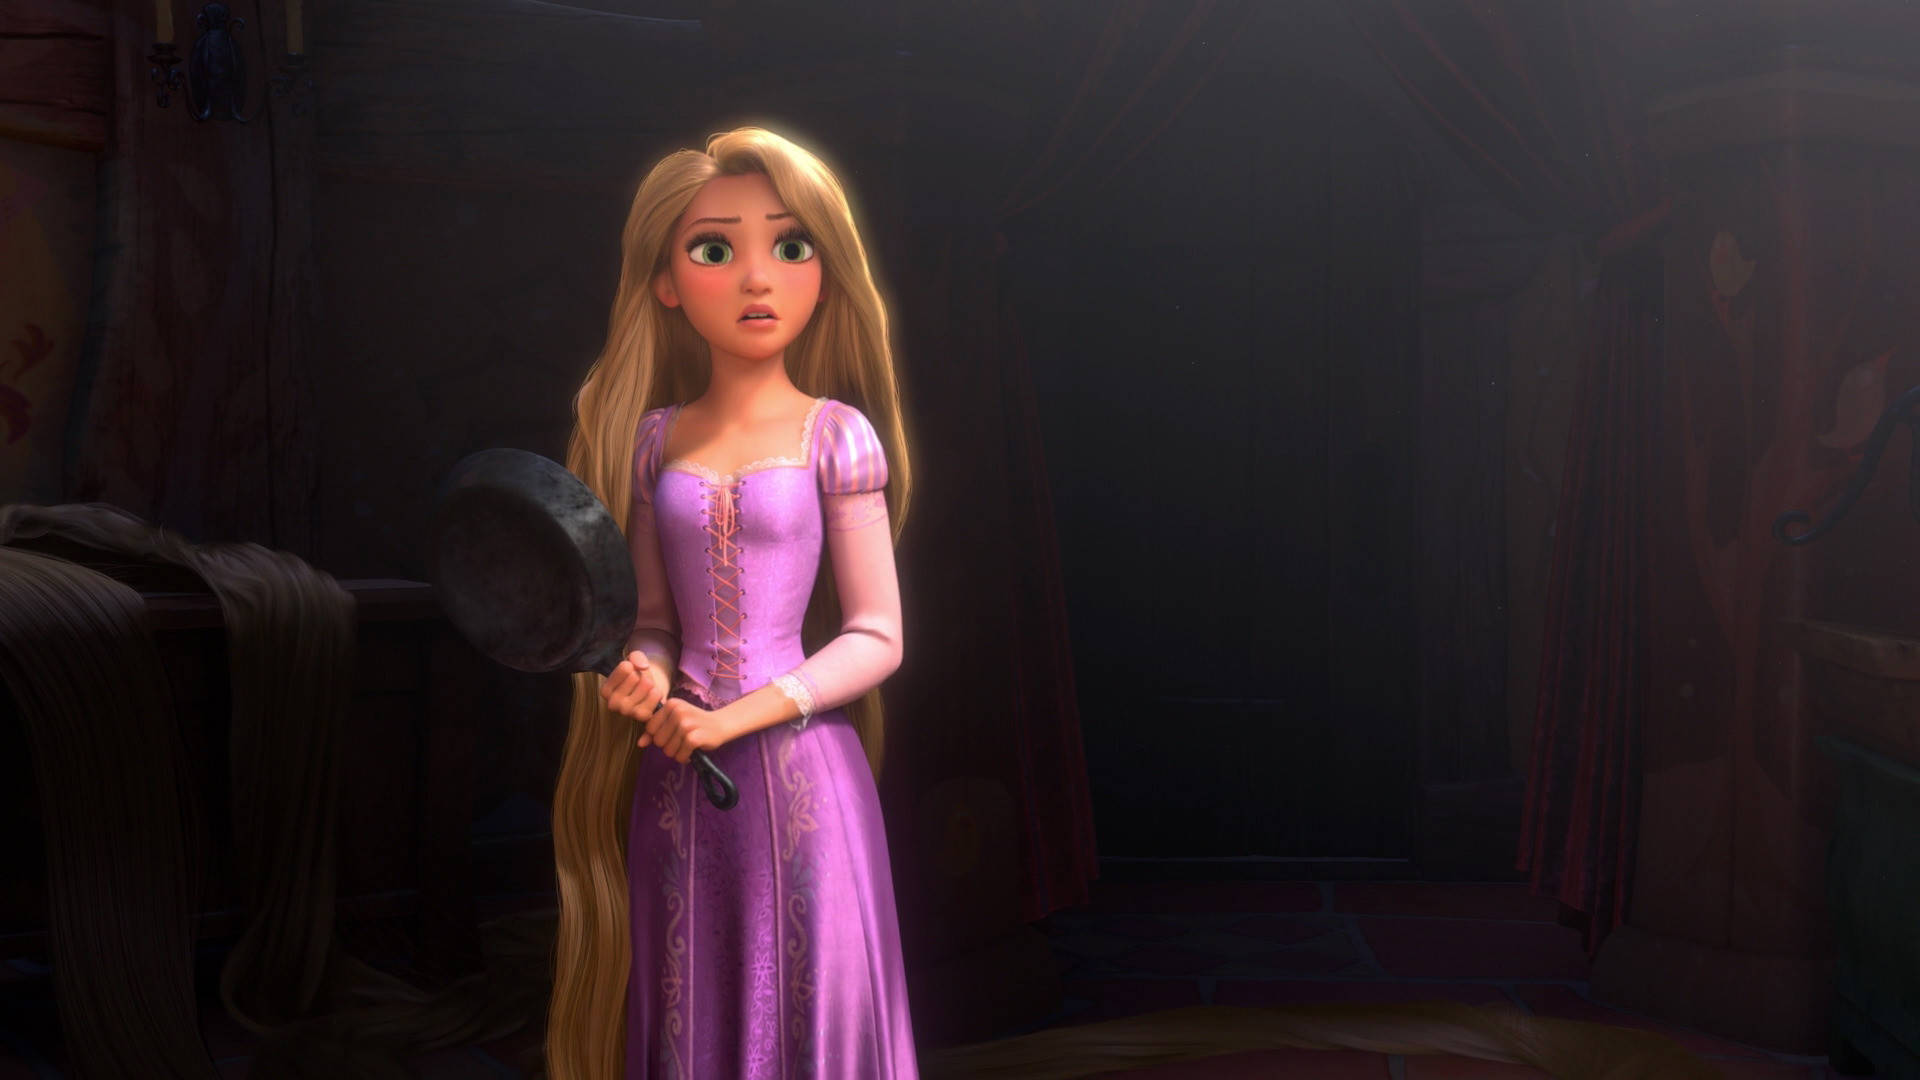 Disney's Rapunzel holds a frying pan in one hand while the other reaches for the sky Wallpaper